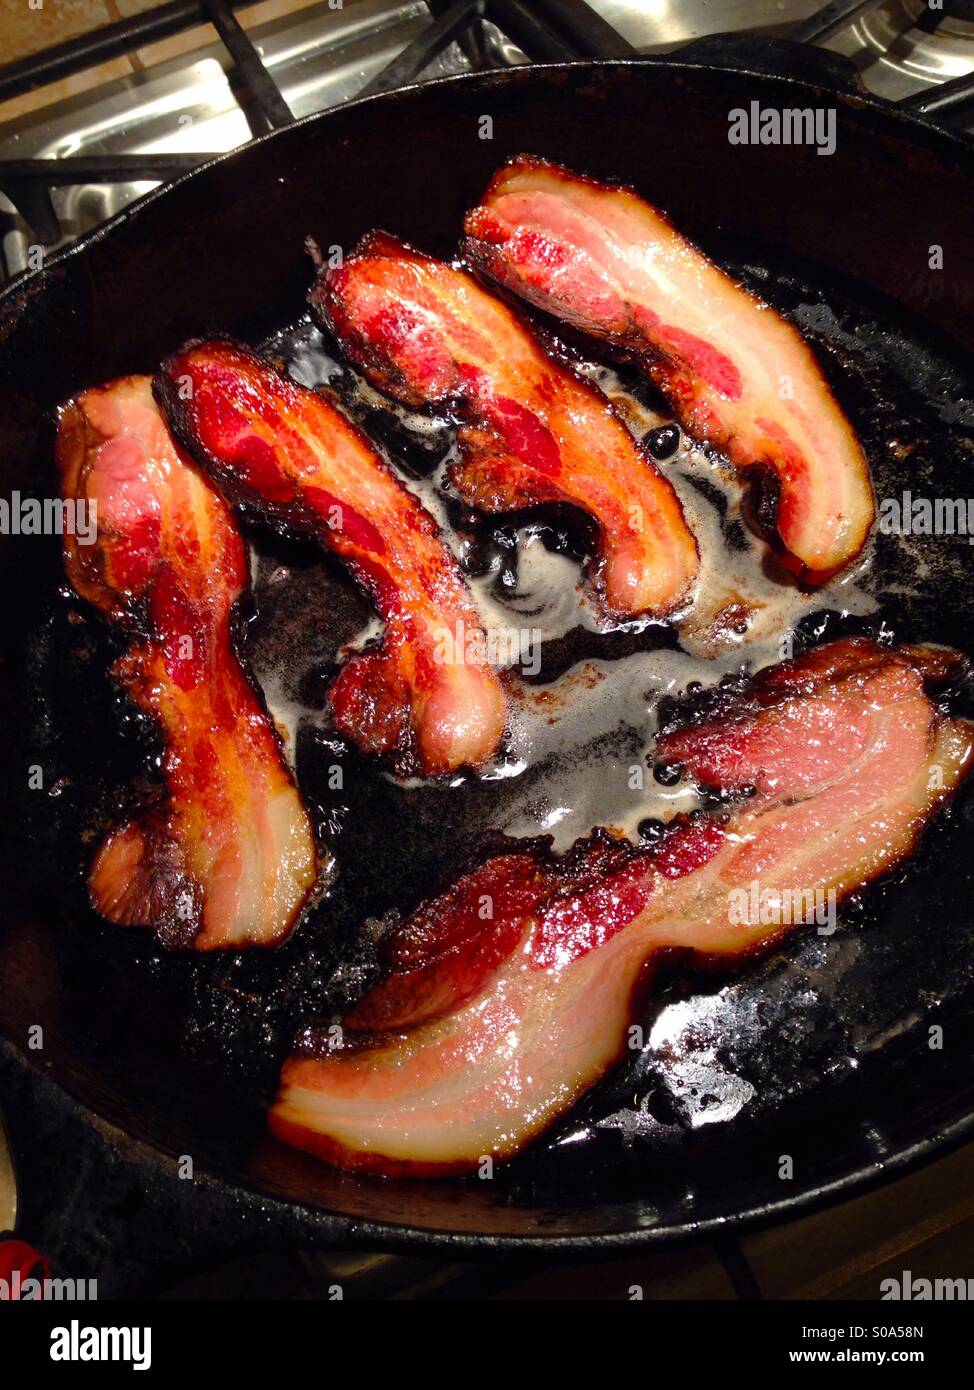 https://c8.alamy.com/comp/S0A58N/bacon-strips-sizzling-in-an-iron-frying-pan-S0A58N.jpg